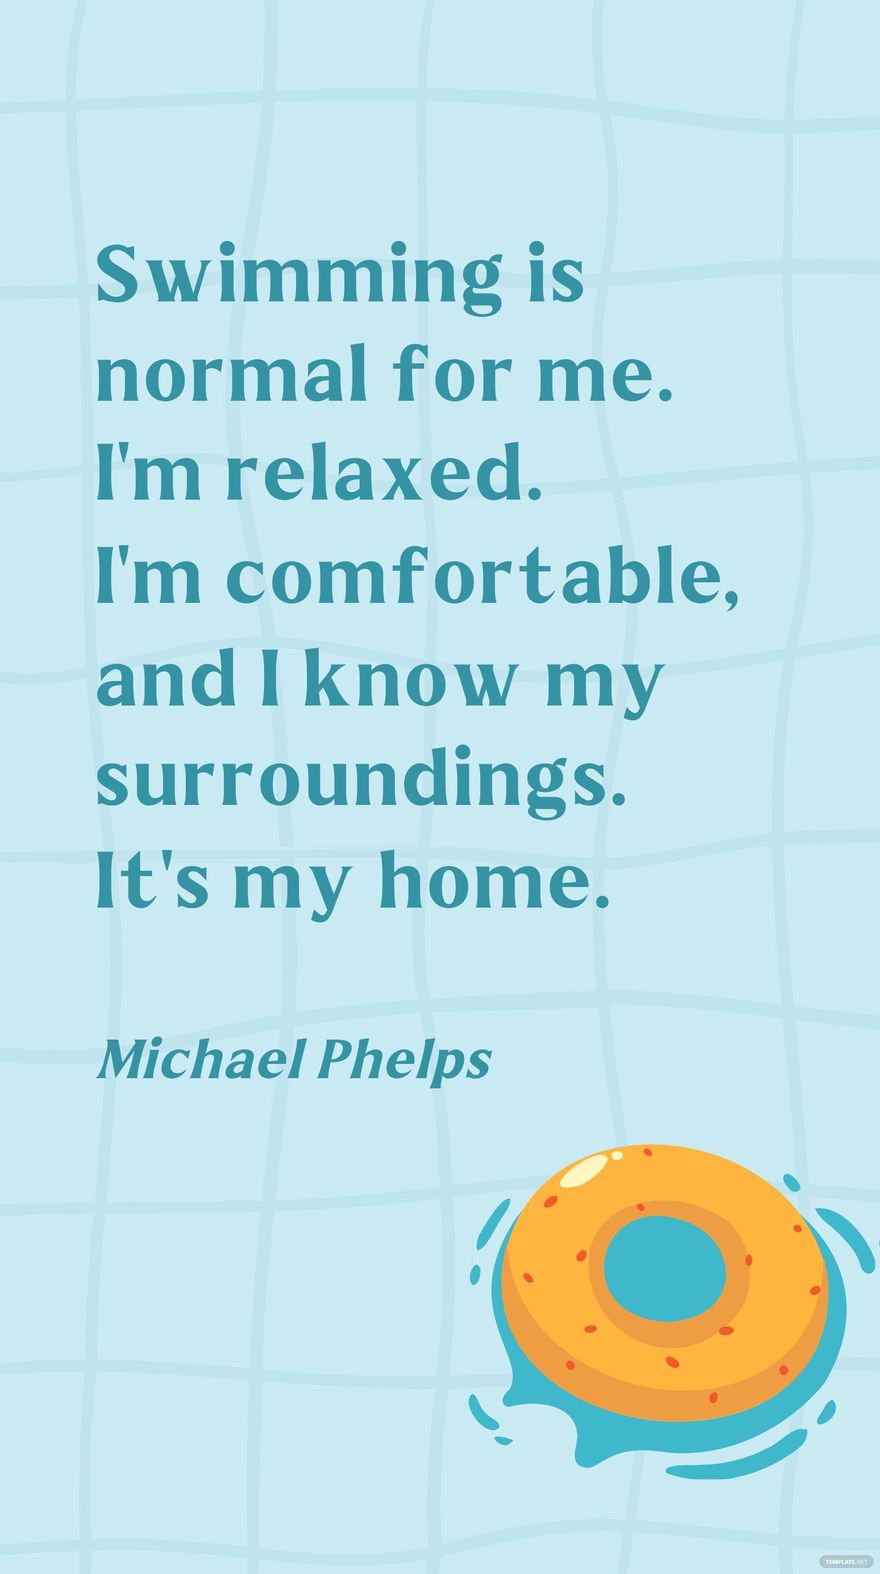 Michael Phelps - Swimming is normal for me. I'm relaxed. I'm comfortable, and I know my surroundings. It's my home.